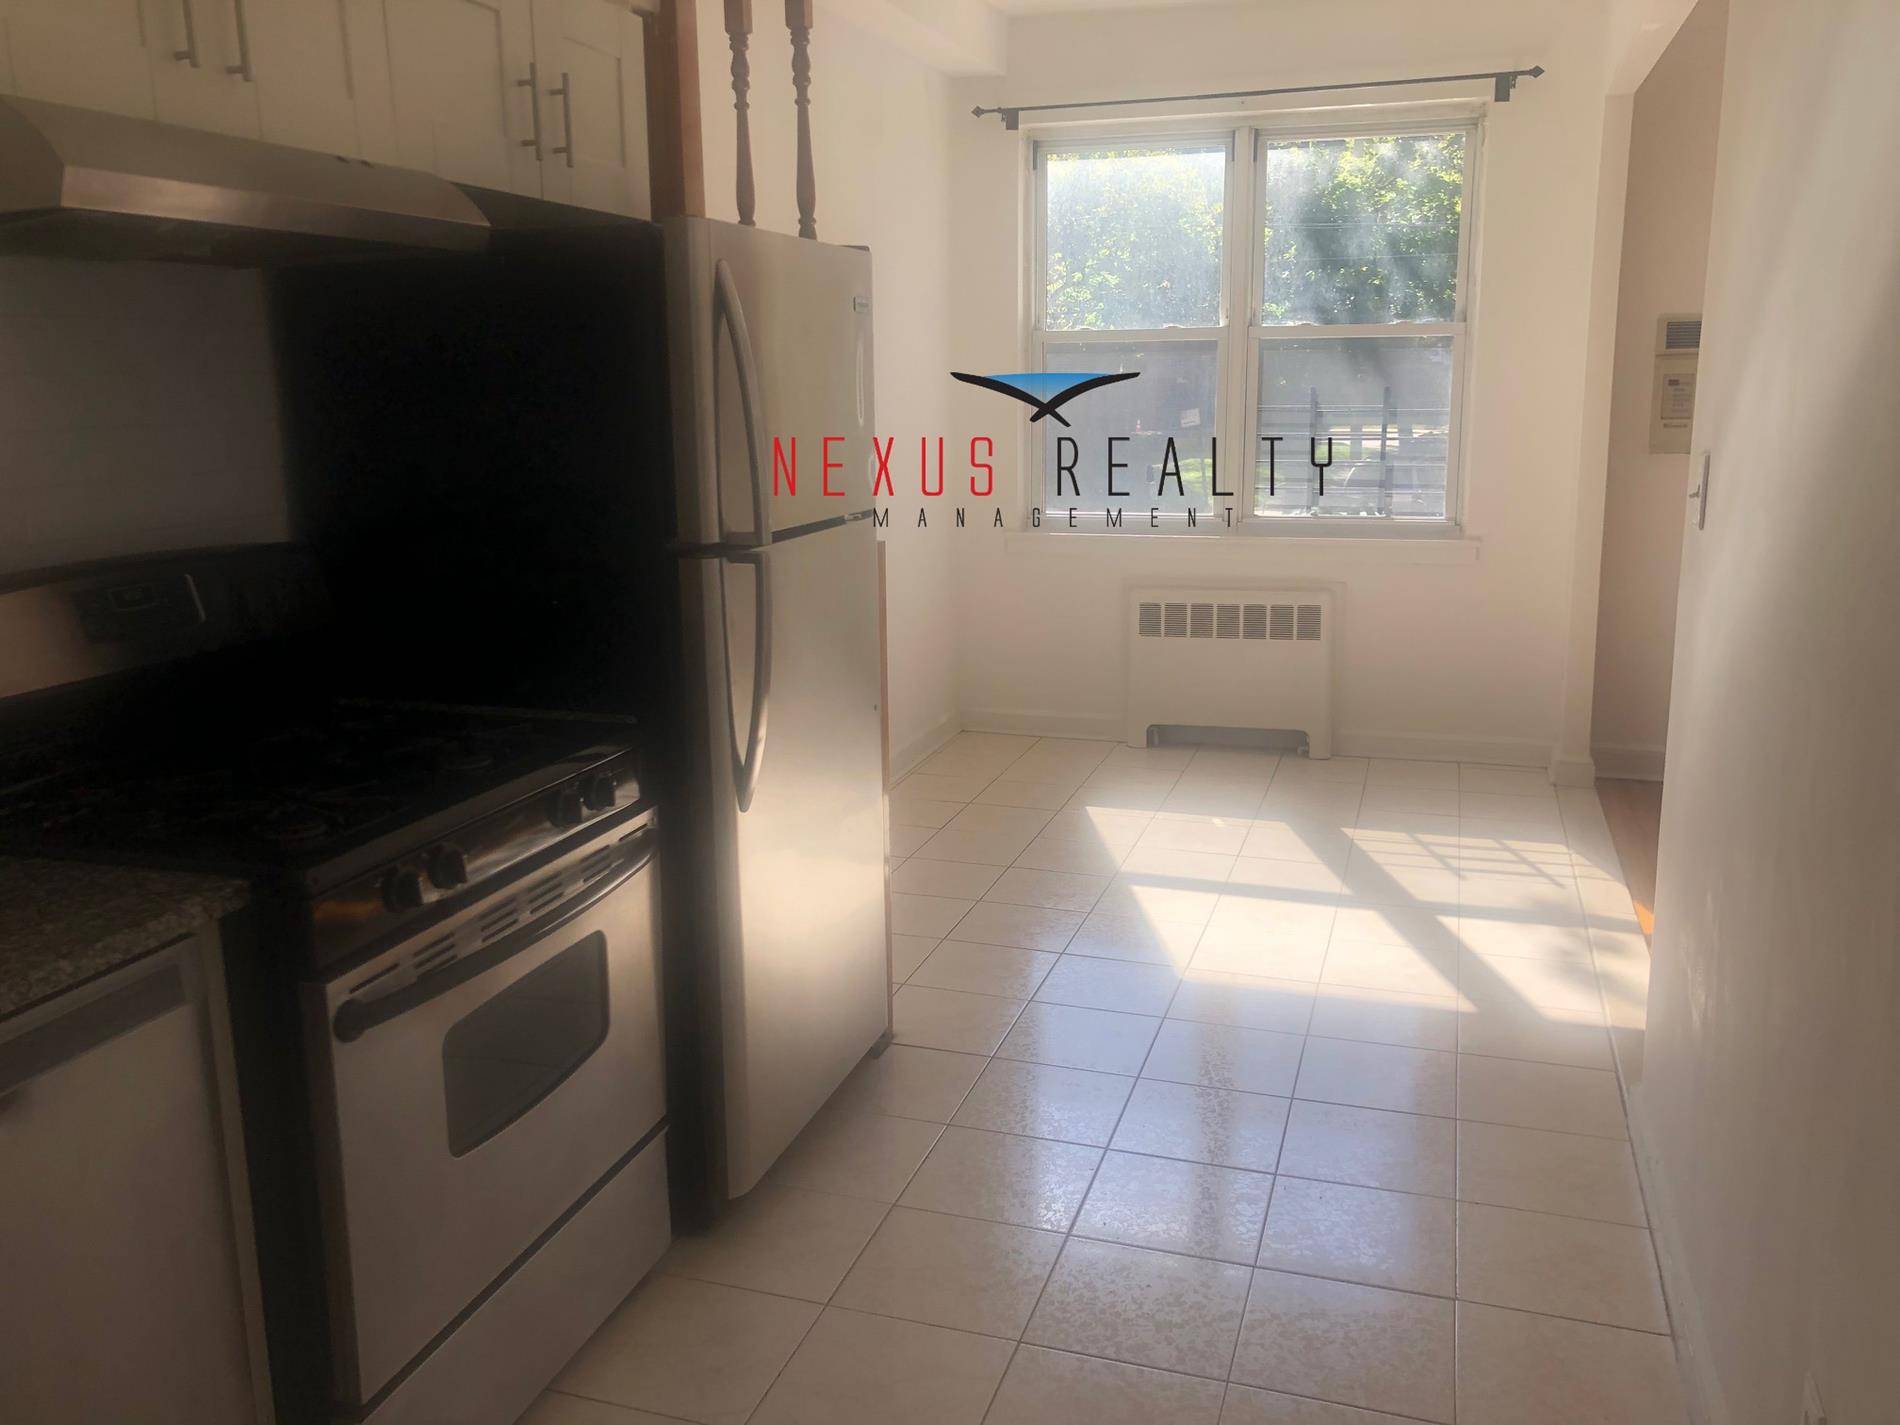 Spacious 2 Bedroom apartment in Sunnyside 22502 Nice bedrooms with great closet space on the 2nd floor in a 3 family houseBeautiful eat in kitchen with great cabinet space, stainless ...